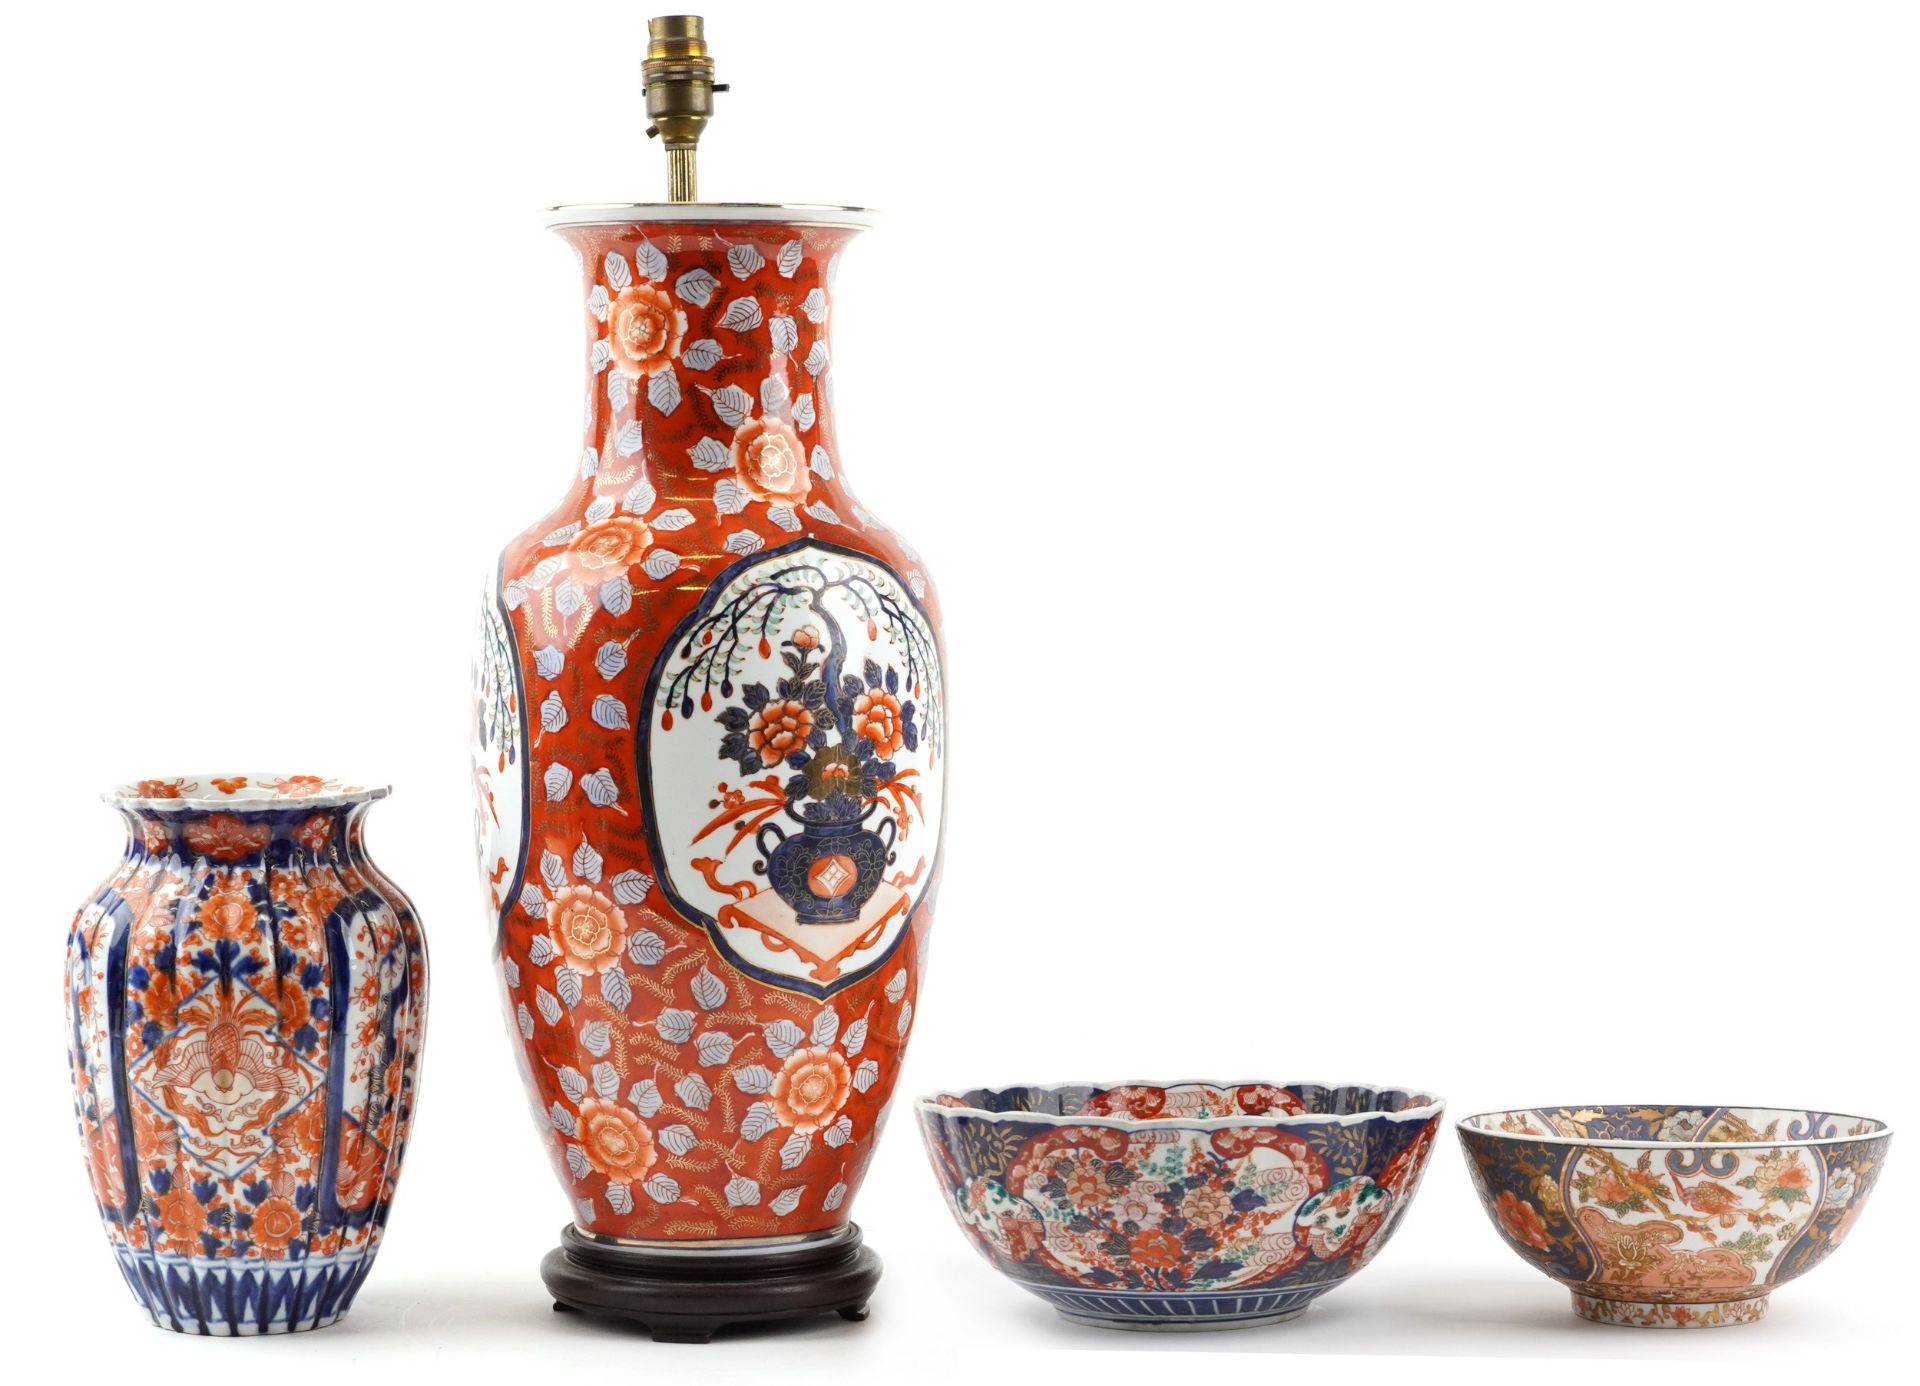 Japanese Imari porcelain including a large vase table lamp, fluted vase hand painted with flowers - Image 2 of 6